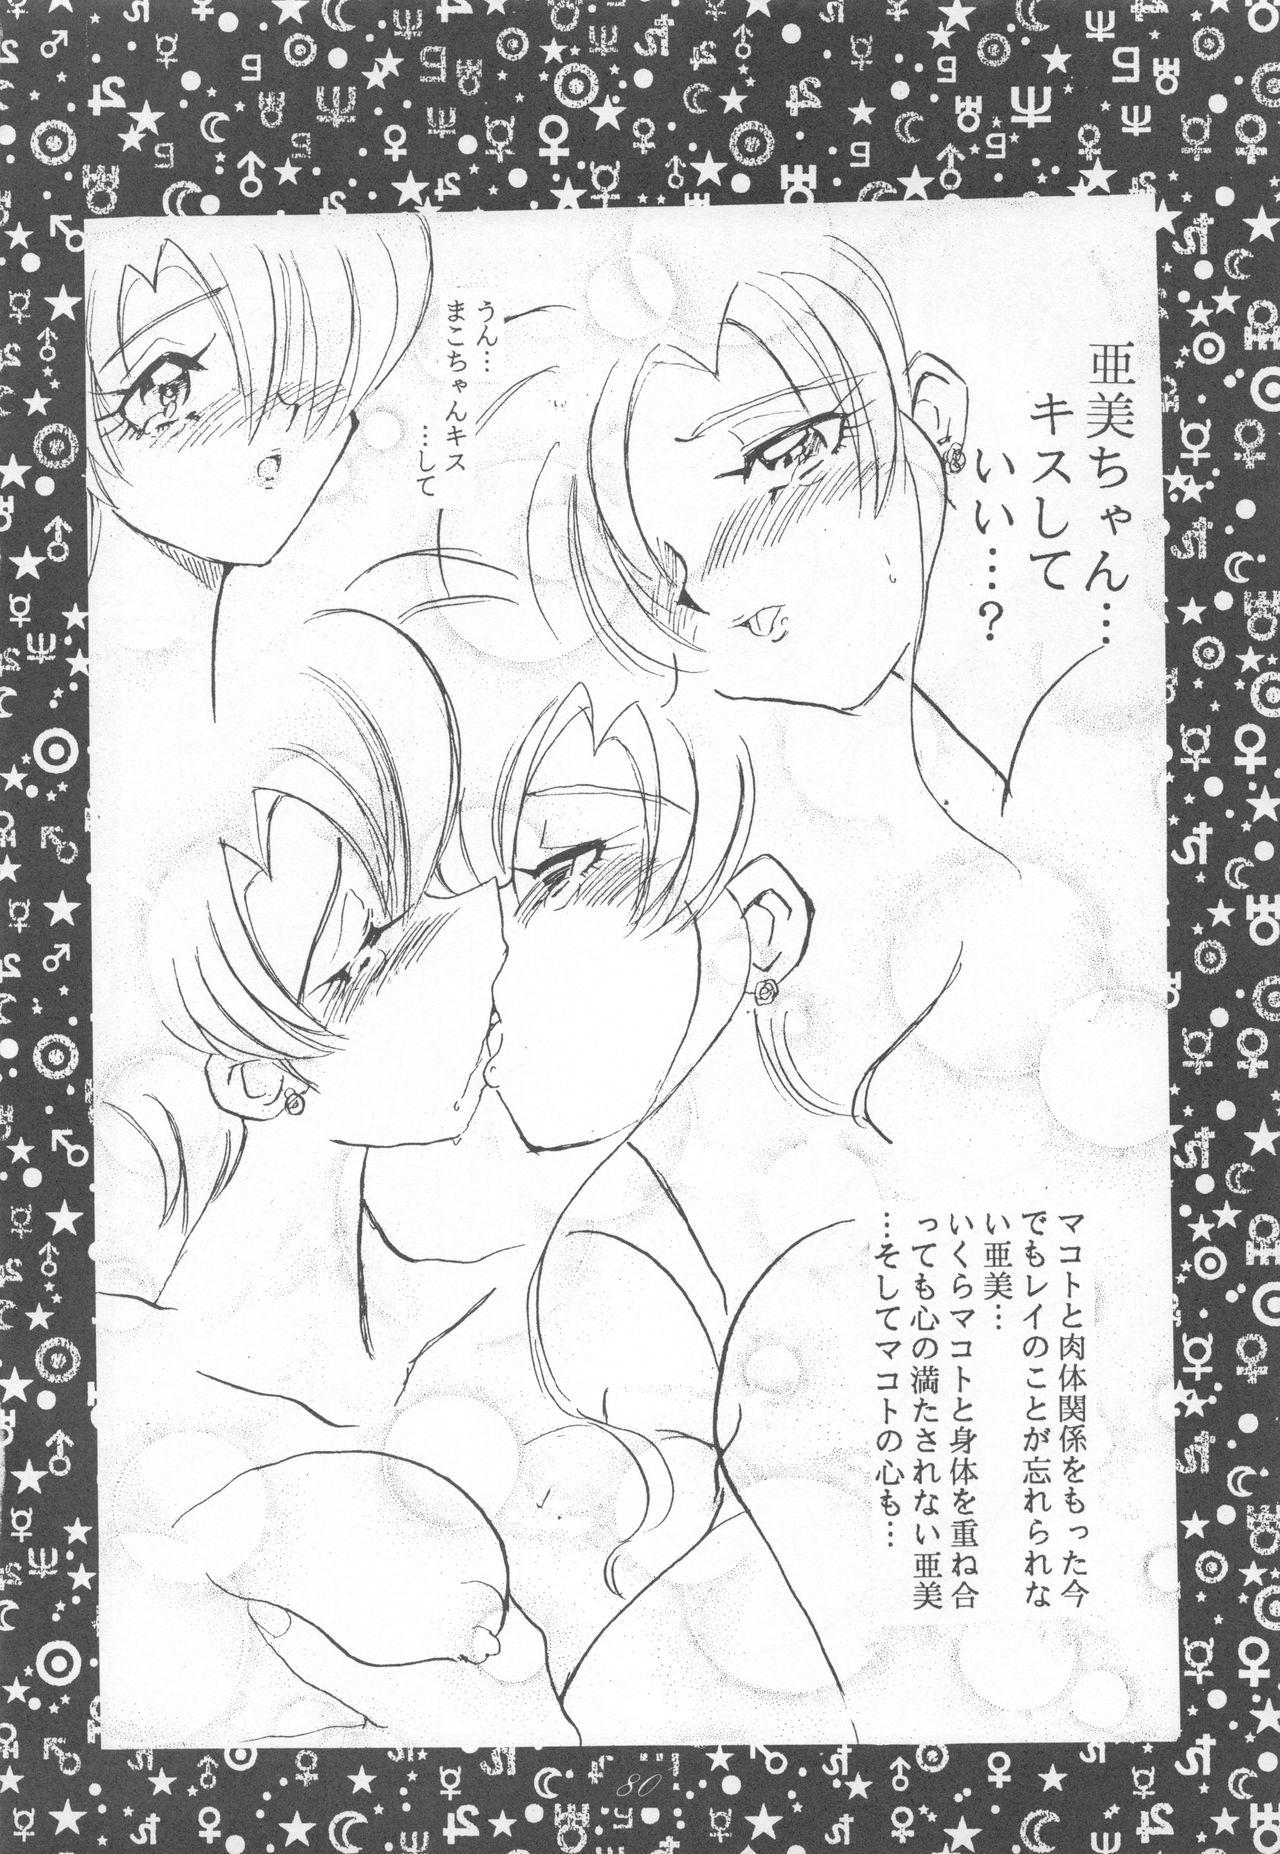 Sailor Moon 1 Page Gekijou P2 - SAILOR MOON ONE PAGE THEATER II 79